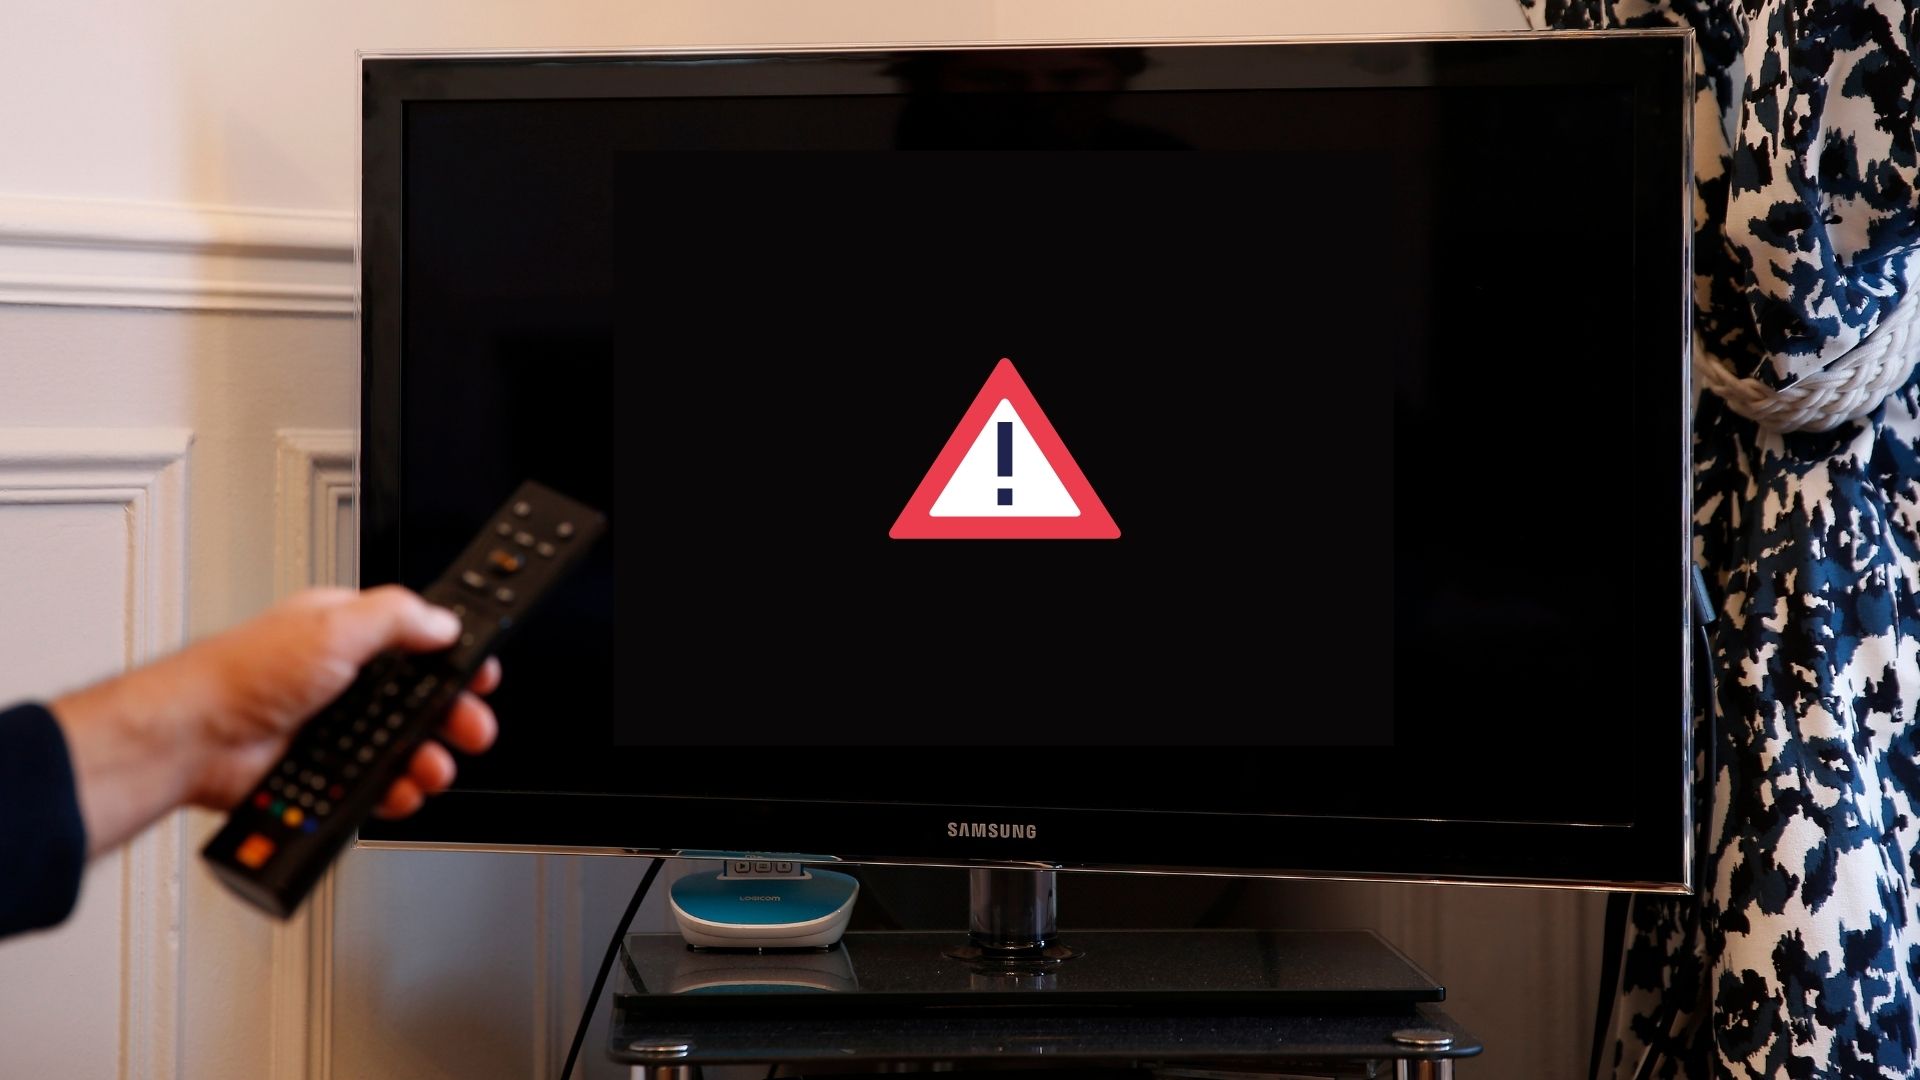 Your Streaming Binge Could Soon Be Interrupted by Emergency Alerts and Tests, Live Streaming Market Could Exceed $245 Billion By 2027, and other top news